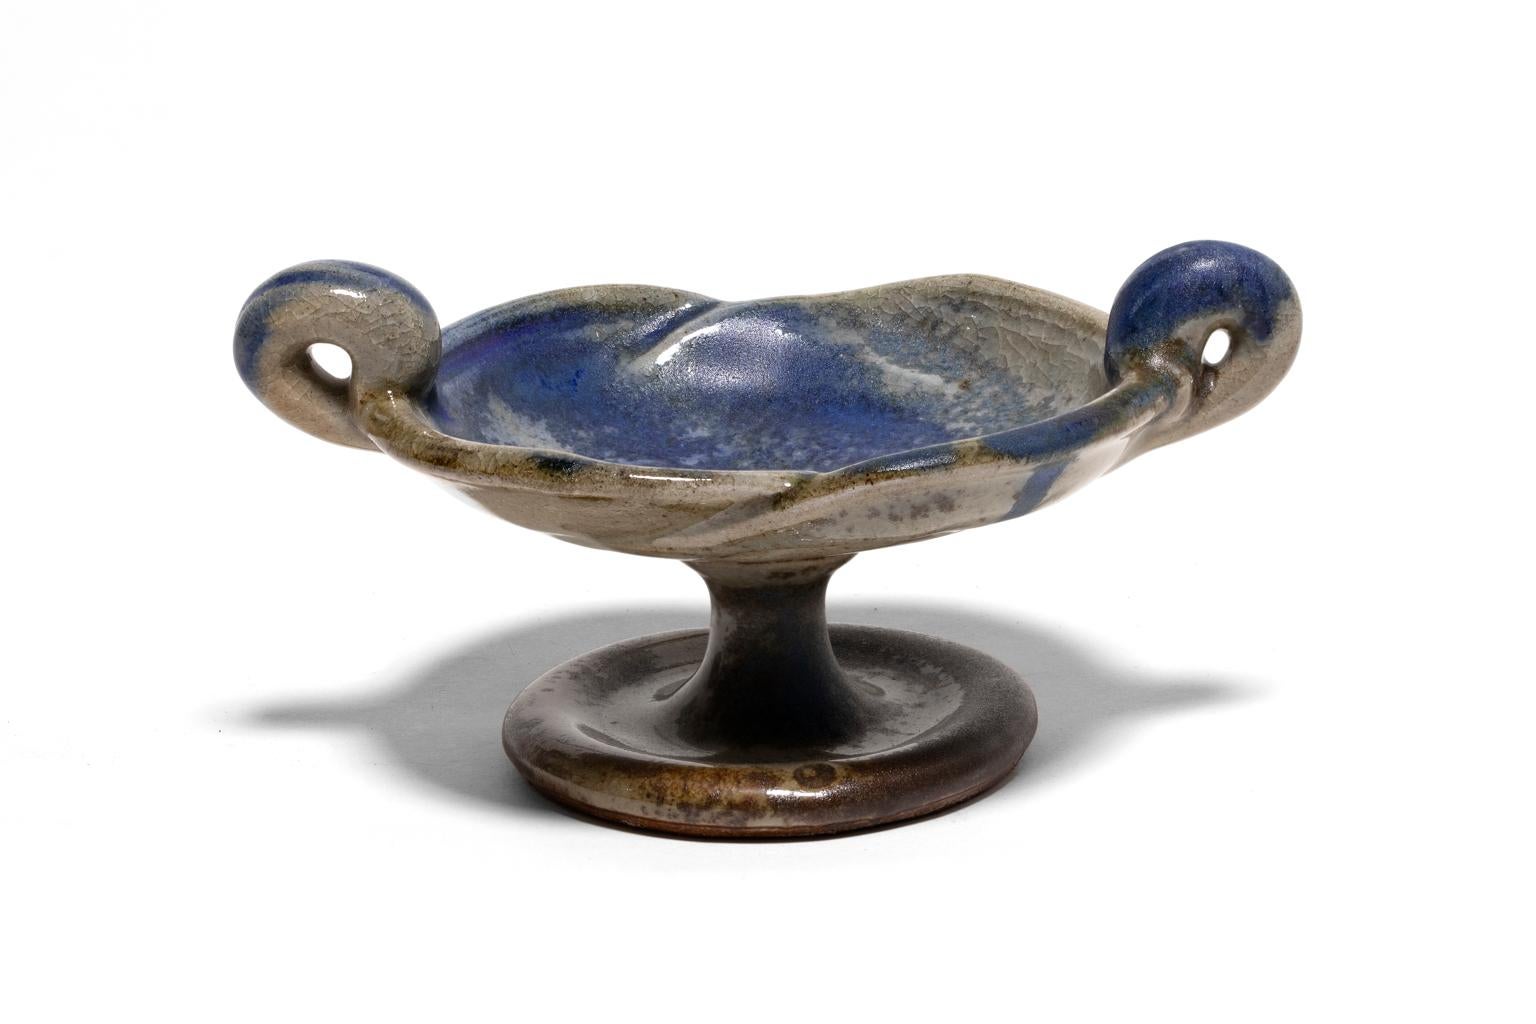 SALE ONE WEEK ONLY

John Glick is well-known for his beautifully rendered functional pieces of art. His decorative pieces, especially his large pots, are breathtakingly powerful objects. Glick's creative genius, however, is most exquisitely shown in